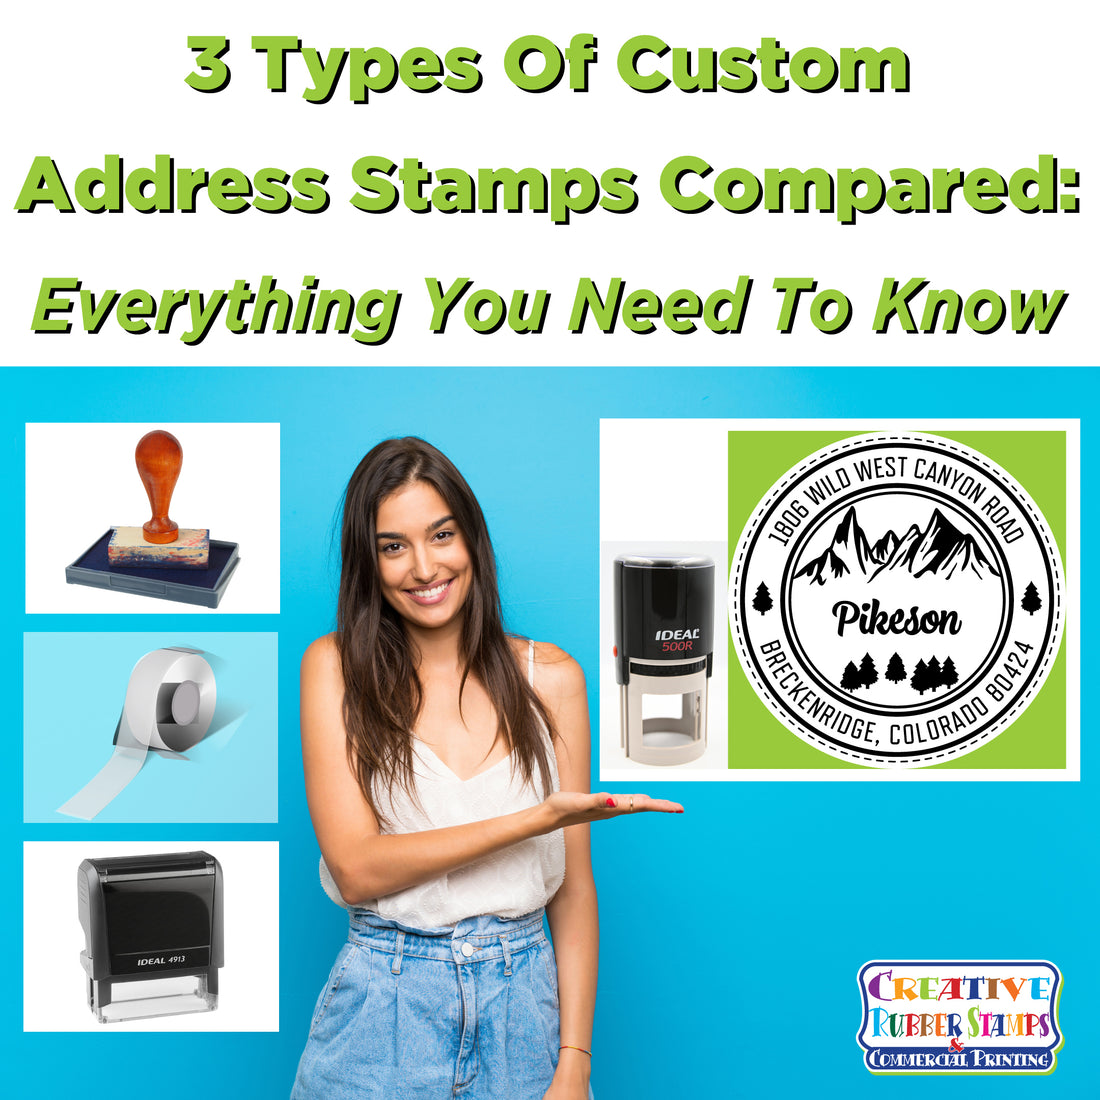 3 Types Of Custom Address Stamps Compared: Everything You Need To Know